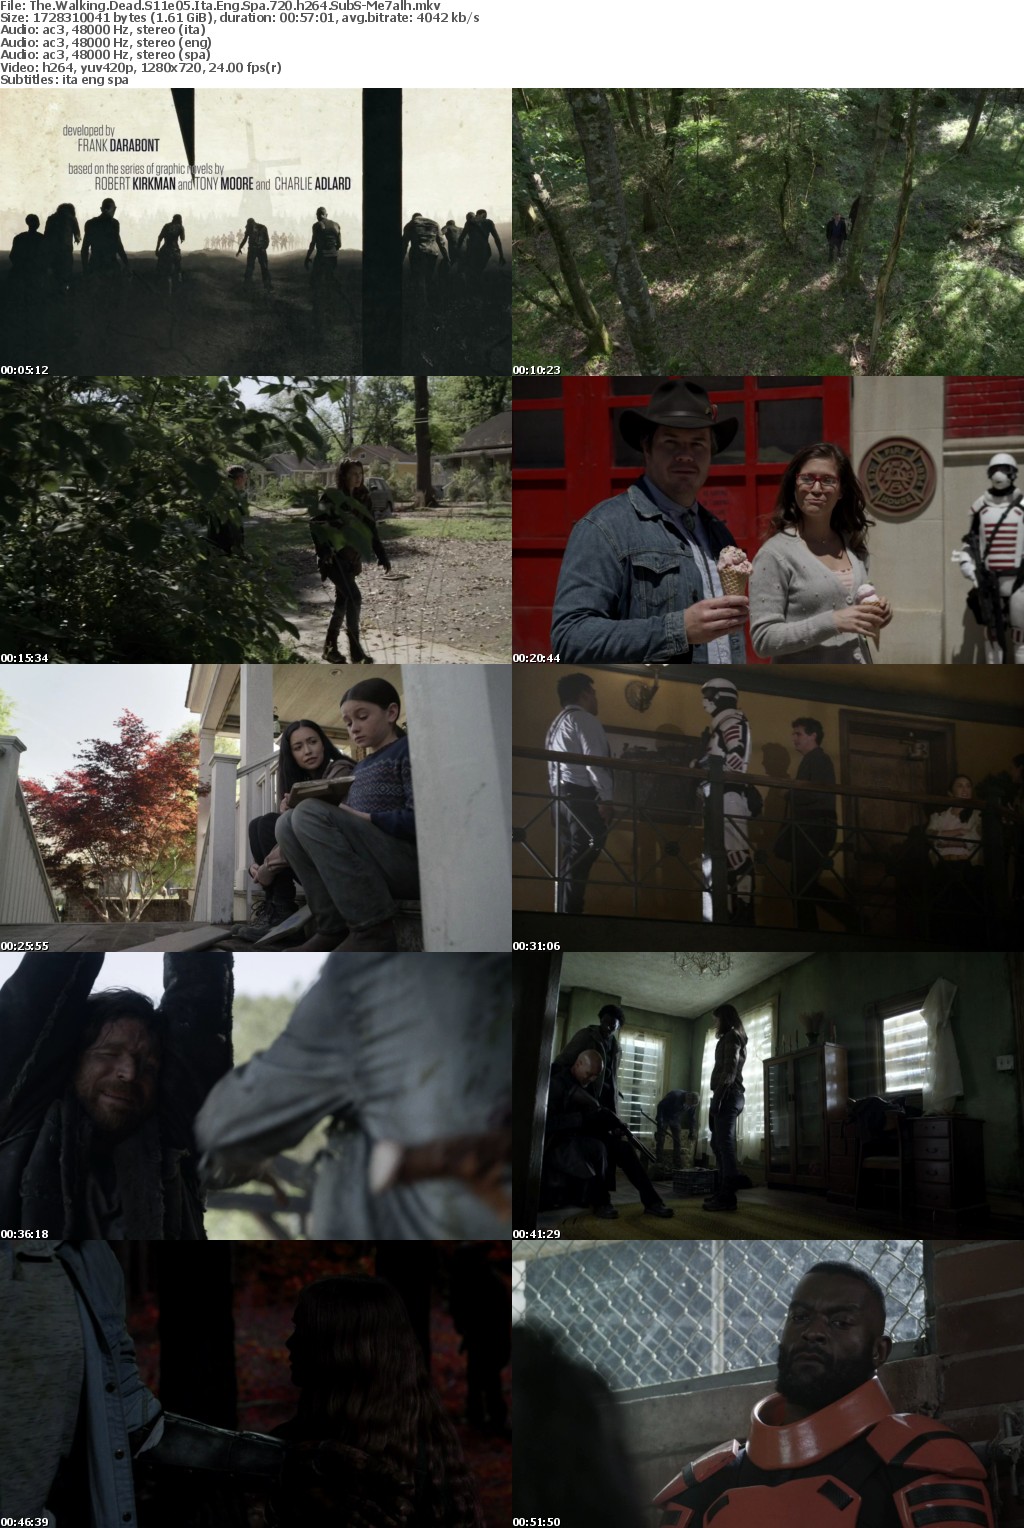 The Walking Dead S11e05 720p Ita Eng Spa SubS MirCrewRelease byMe7alh